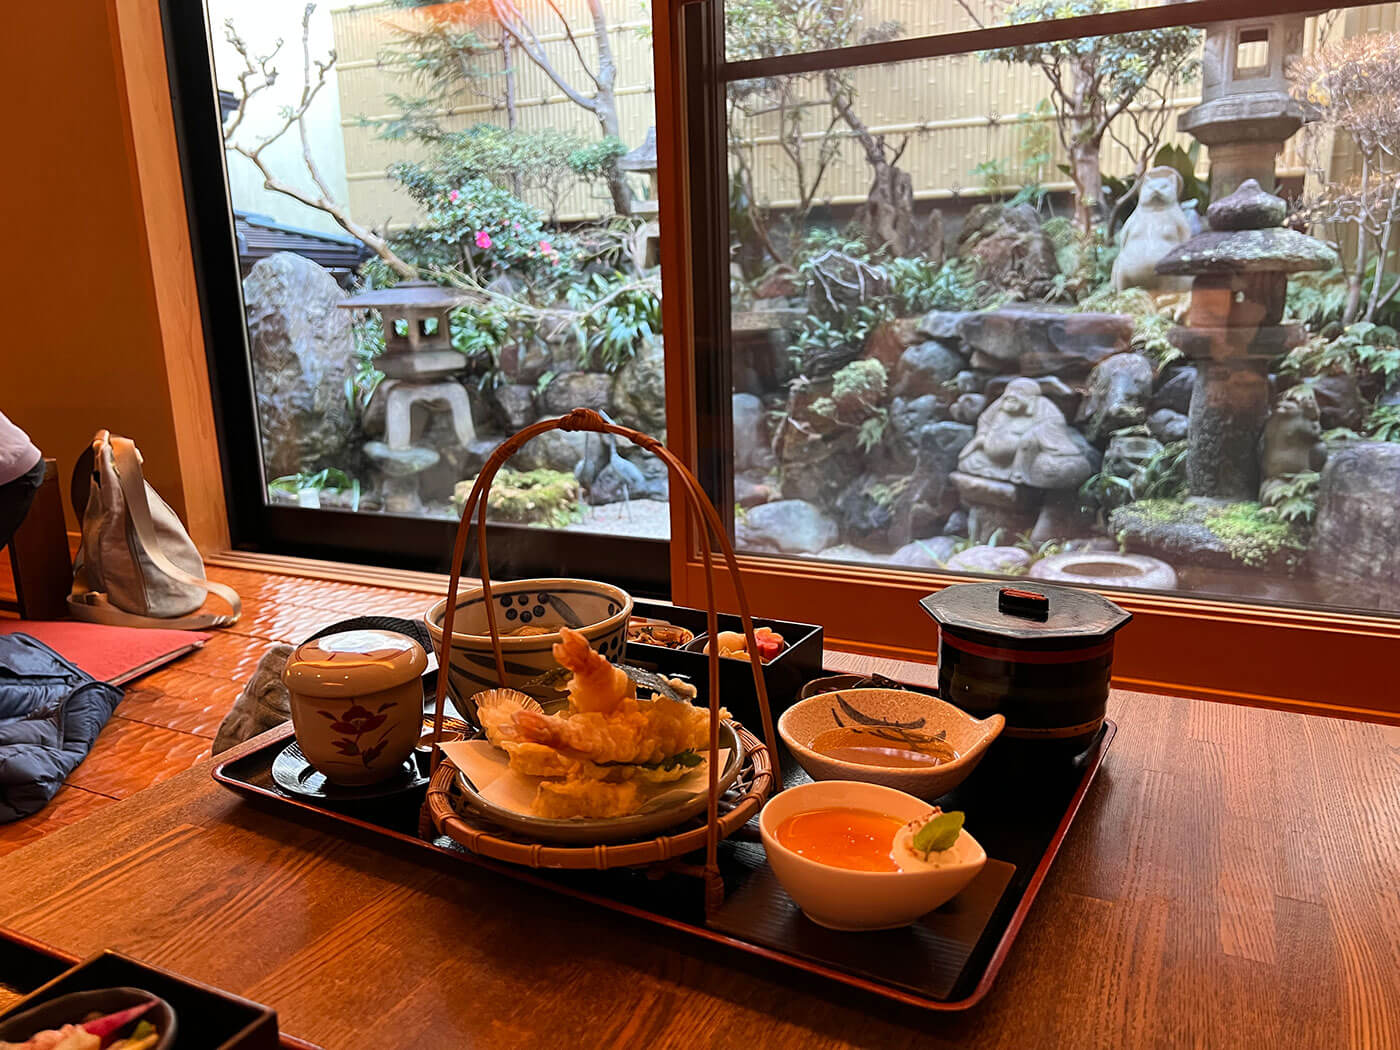 A meal in Kyoto